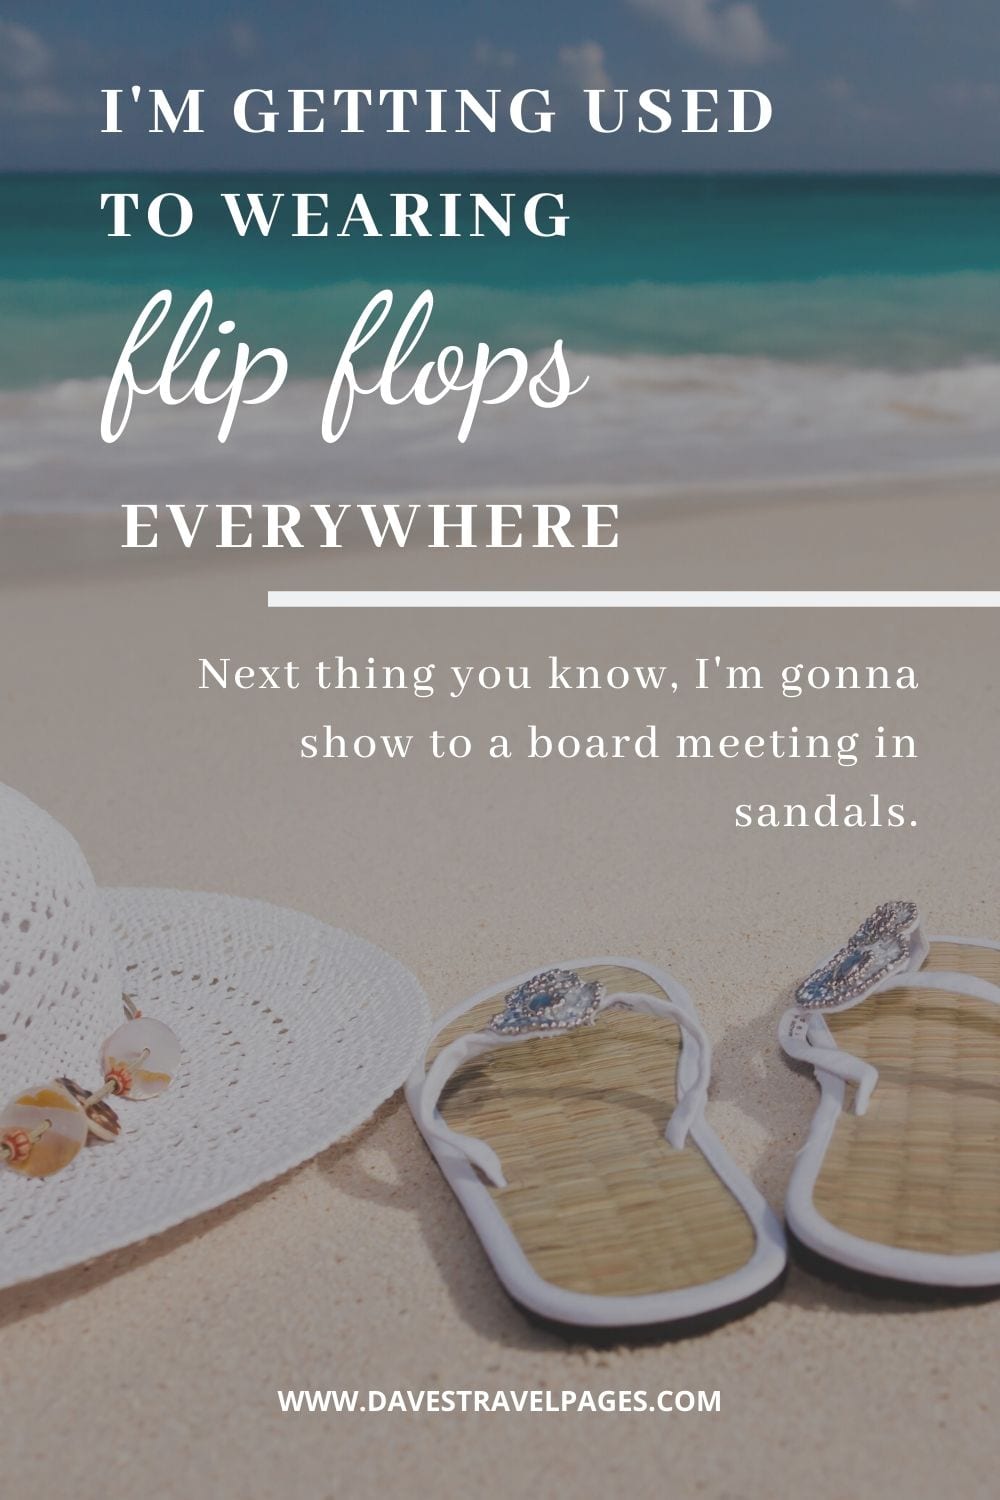 Travel slogans and phrases: "I'm getting used to wearing flip flops everywhere. It's a dangerous place to be. Next thing you know, I'm gonna show to a board meeting in sandals."